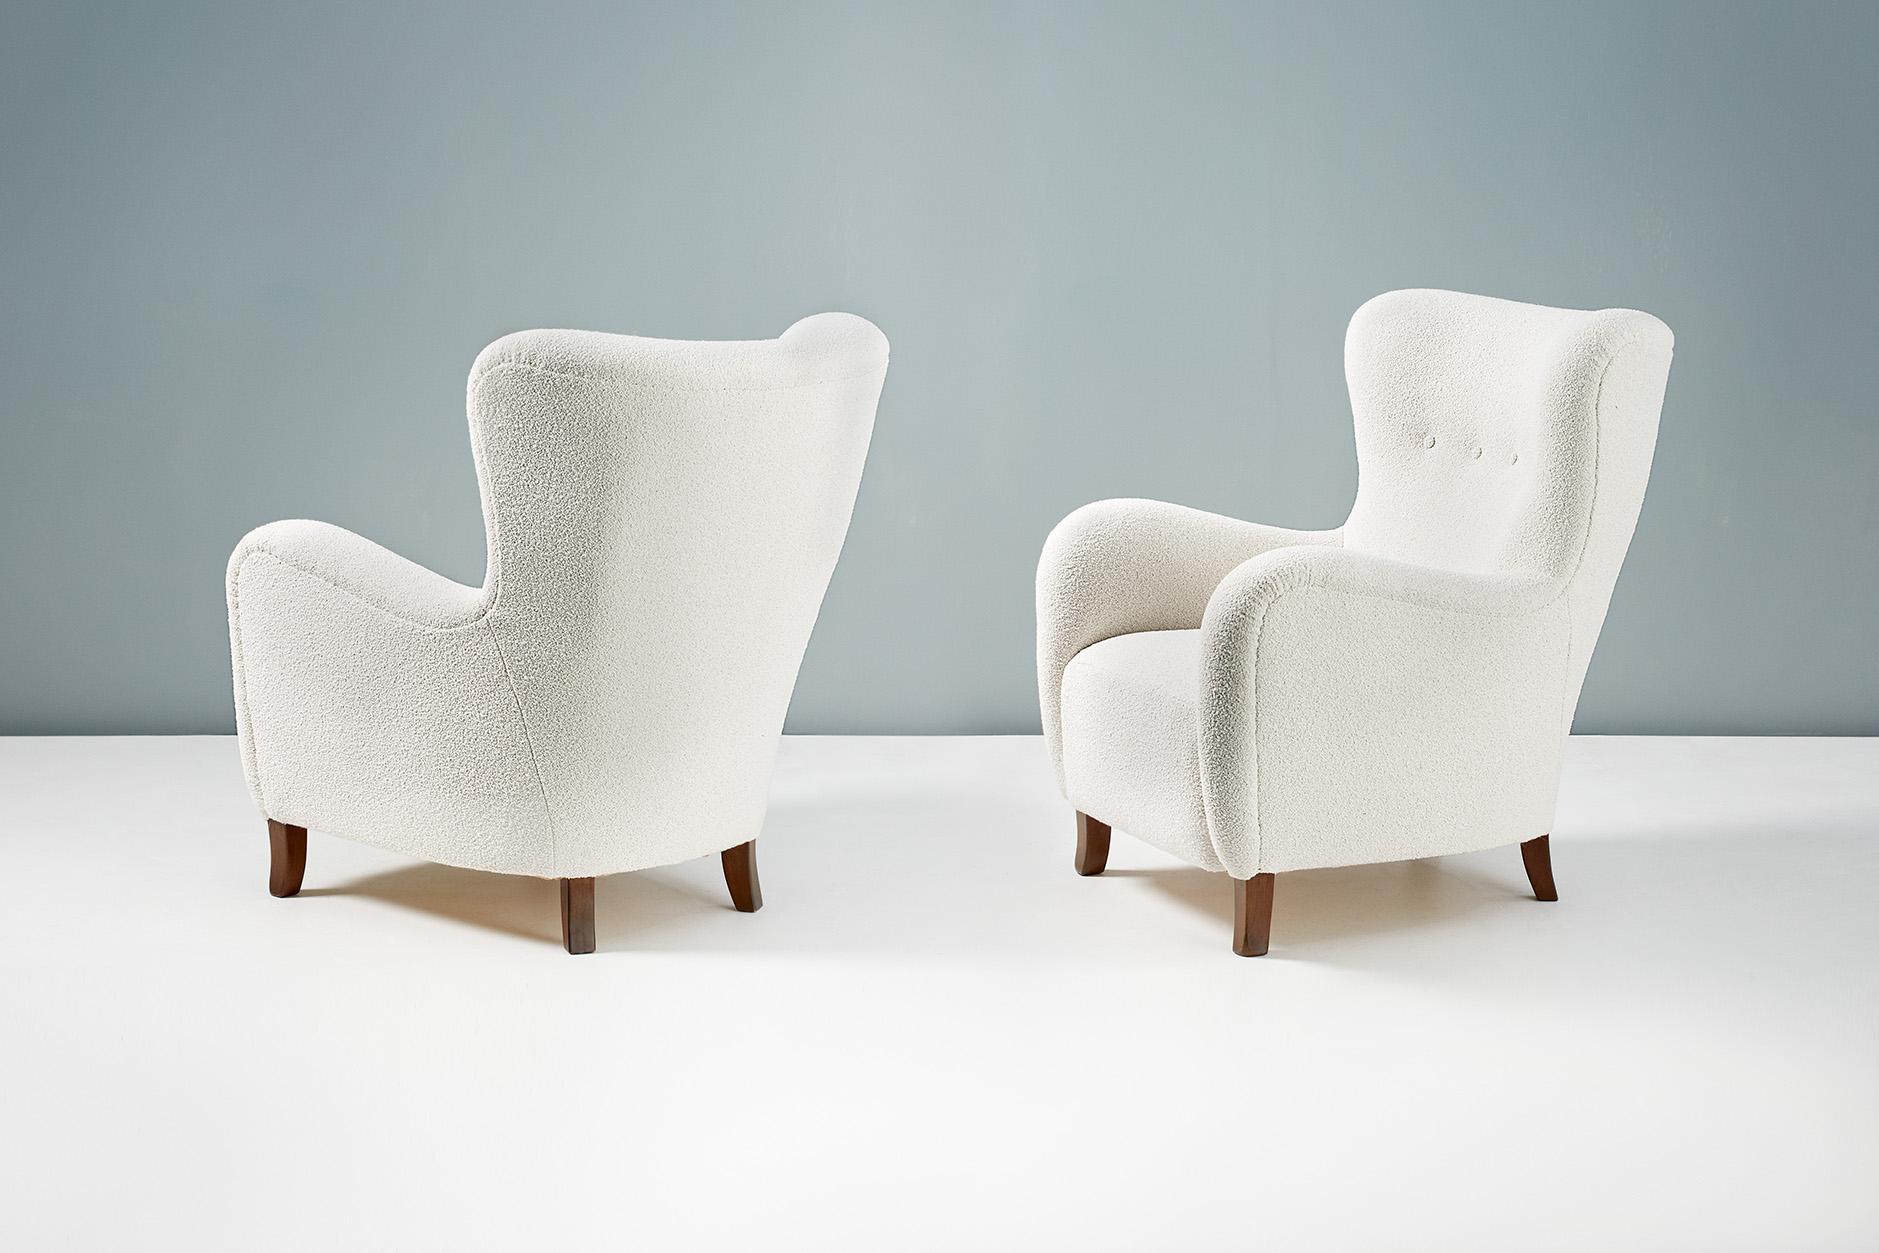 Dagmar design custom-made upholstered range

A pair of custom made wing chairs developed and produced at our workshops in London using the highest quality materials. The frames are hand-built from solid tulipwood with legs in a range of wood types